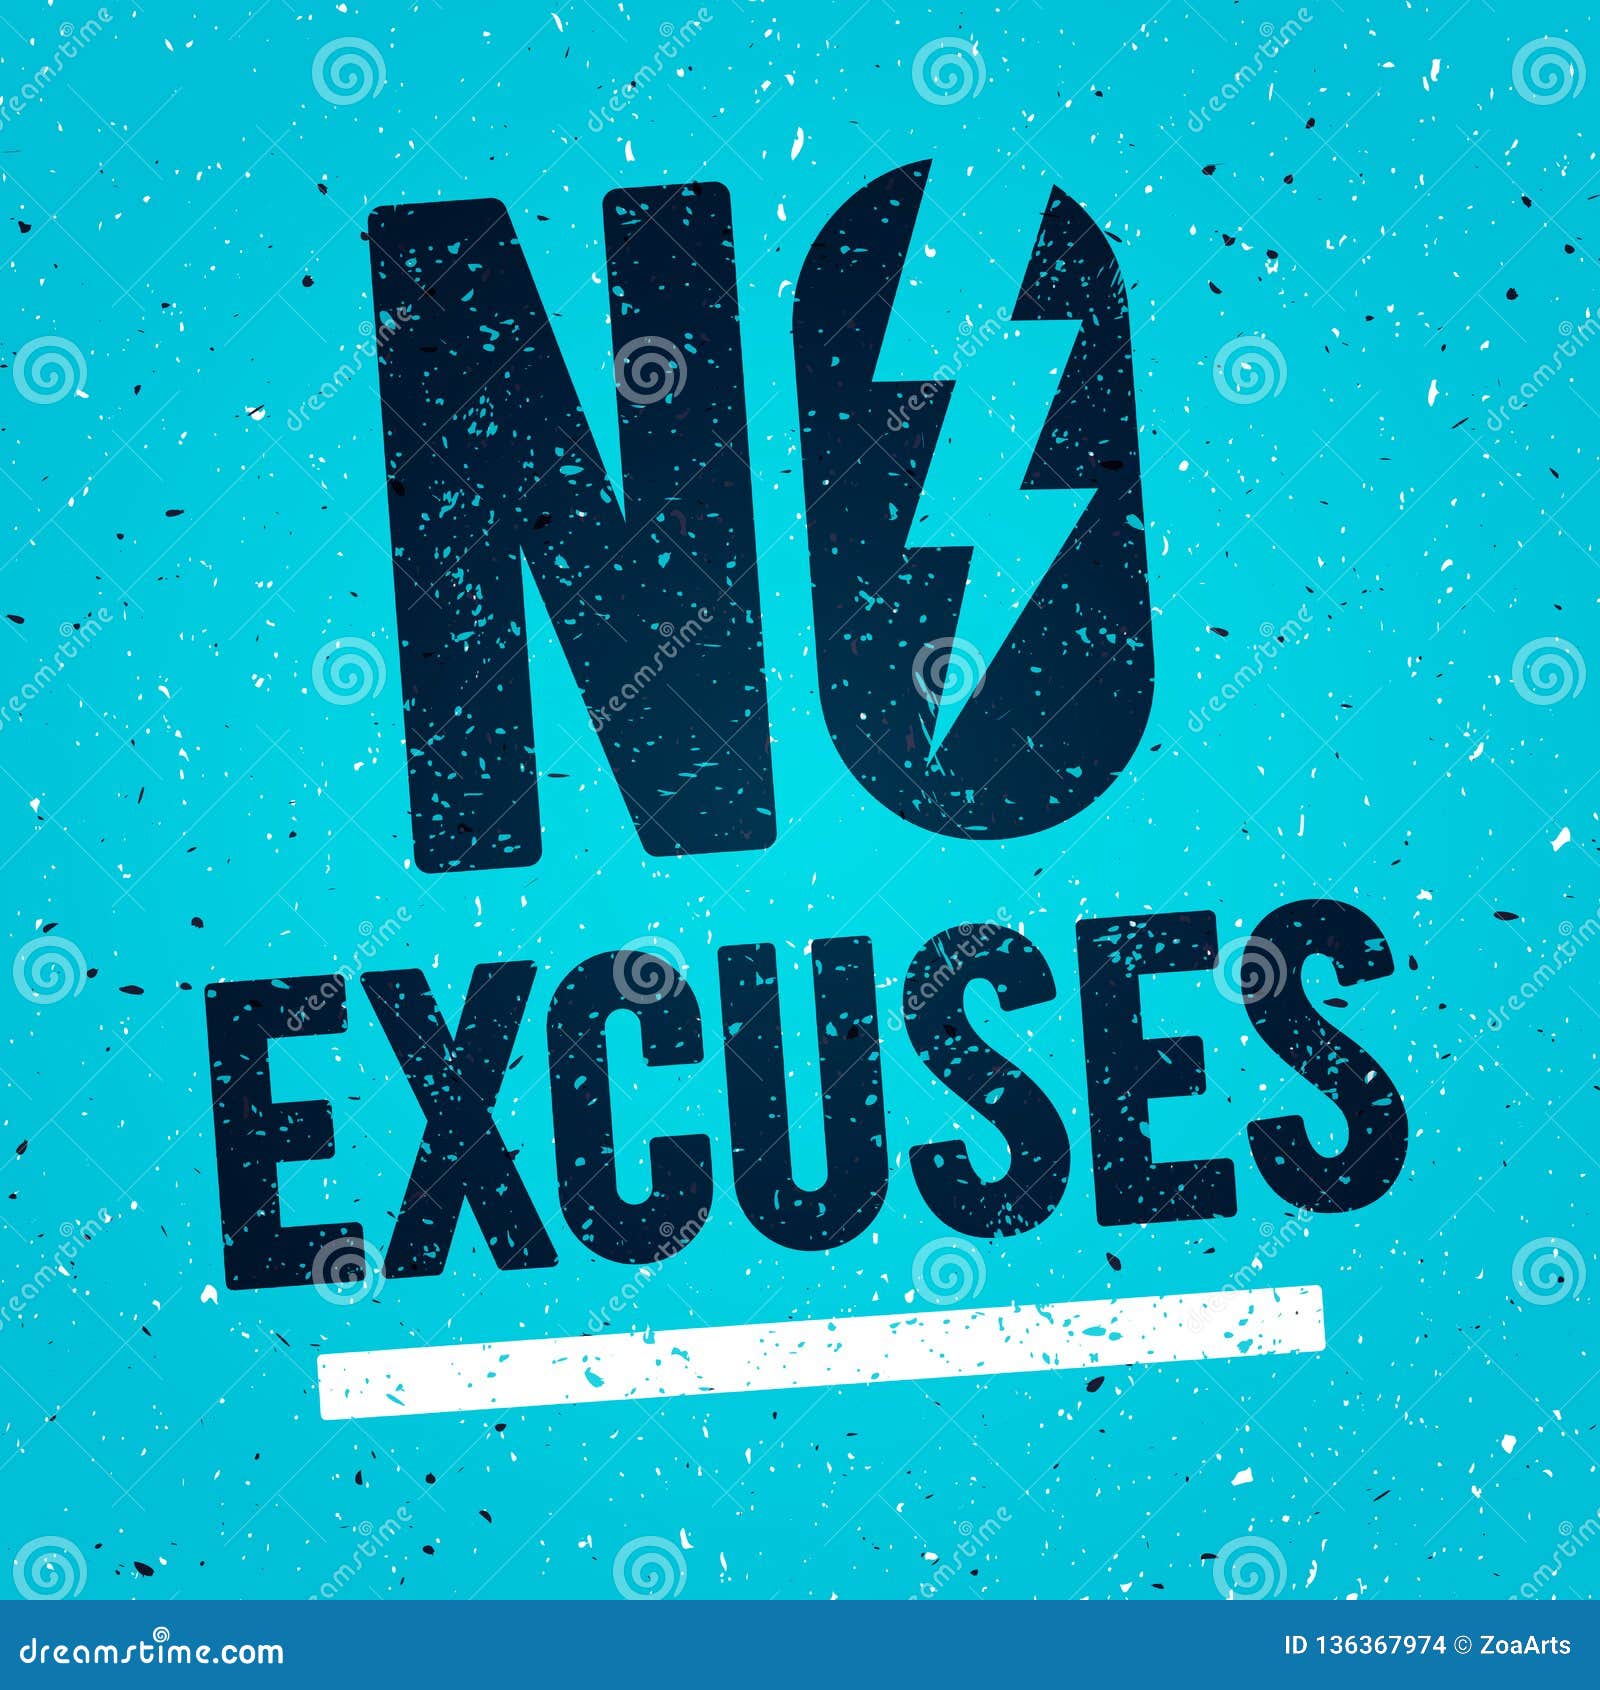   concept no excuses. fitness gym muscle workout. inspiring and motivation quote poster. typography on grunge t